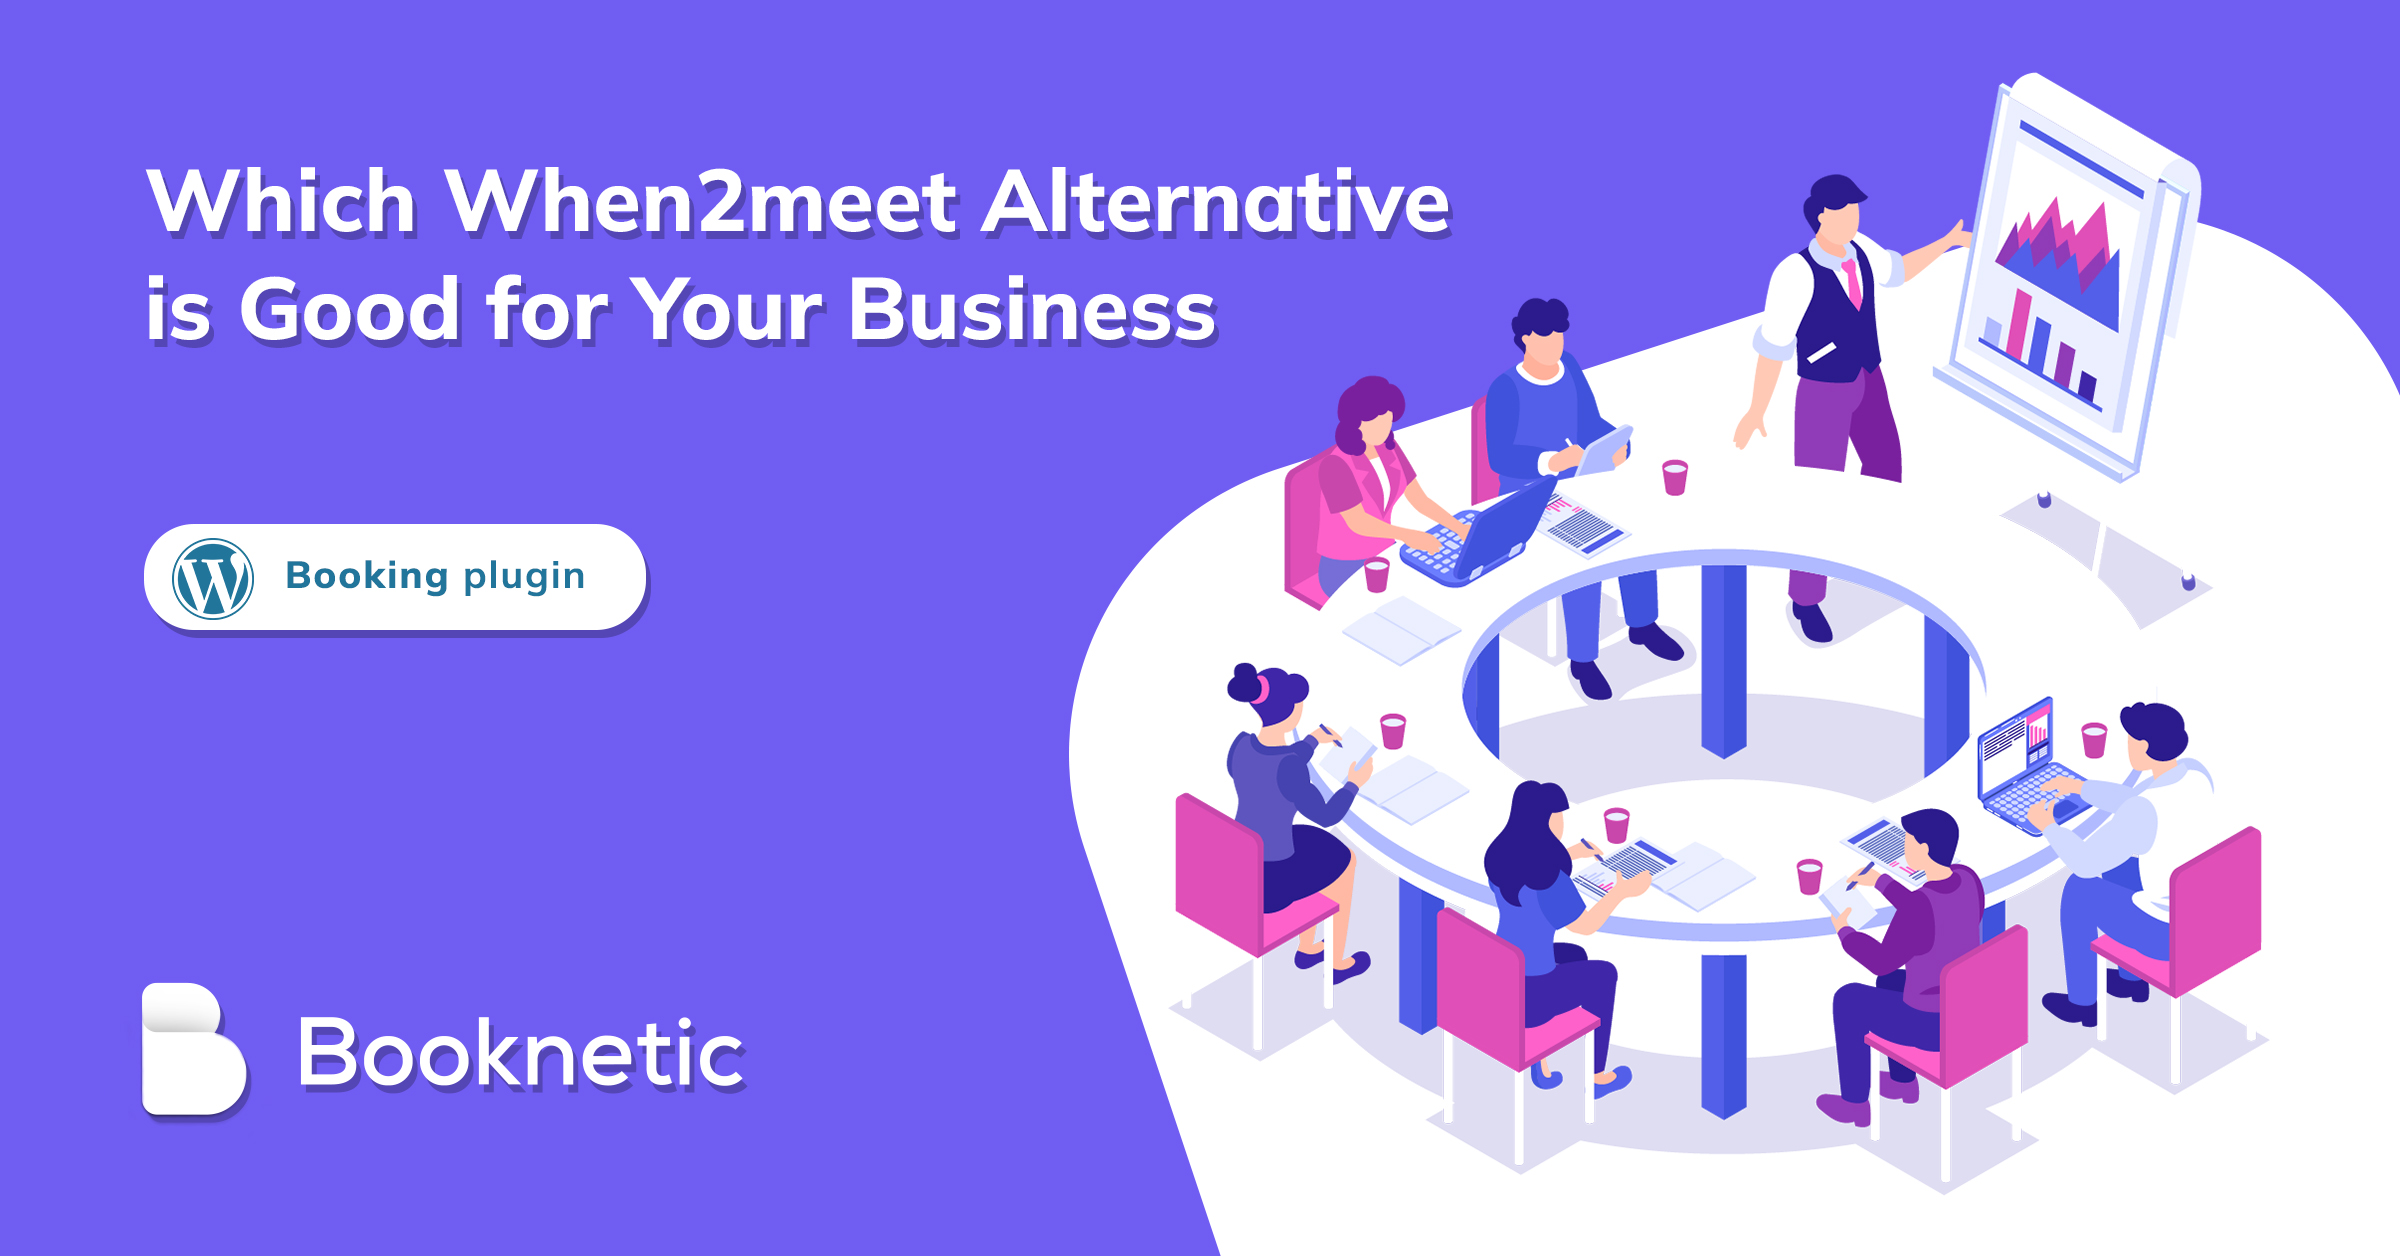 Which When2meet Alternative is Good for Your Business?